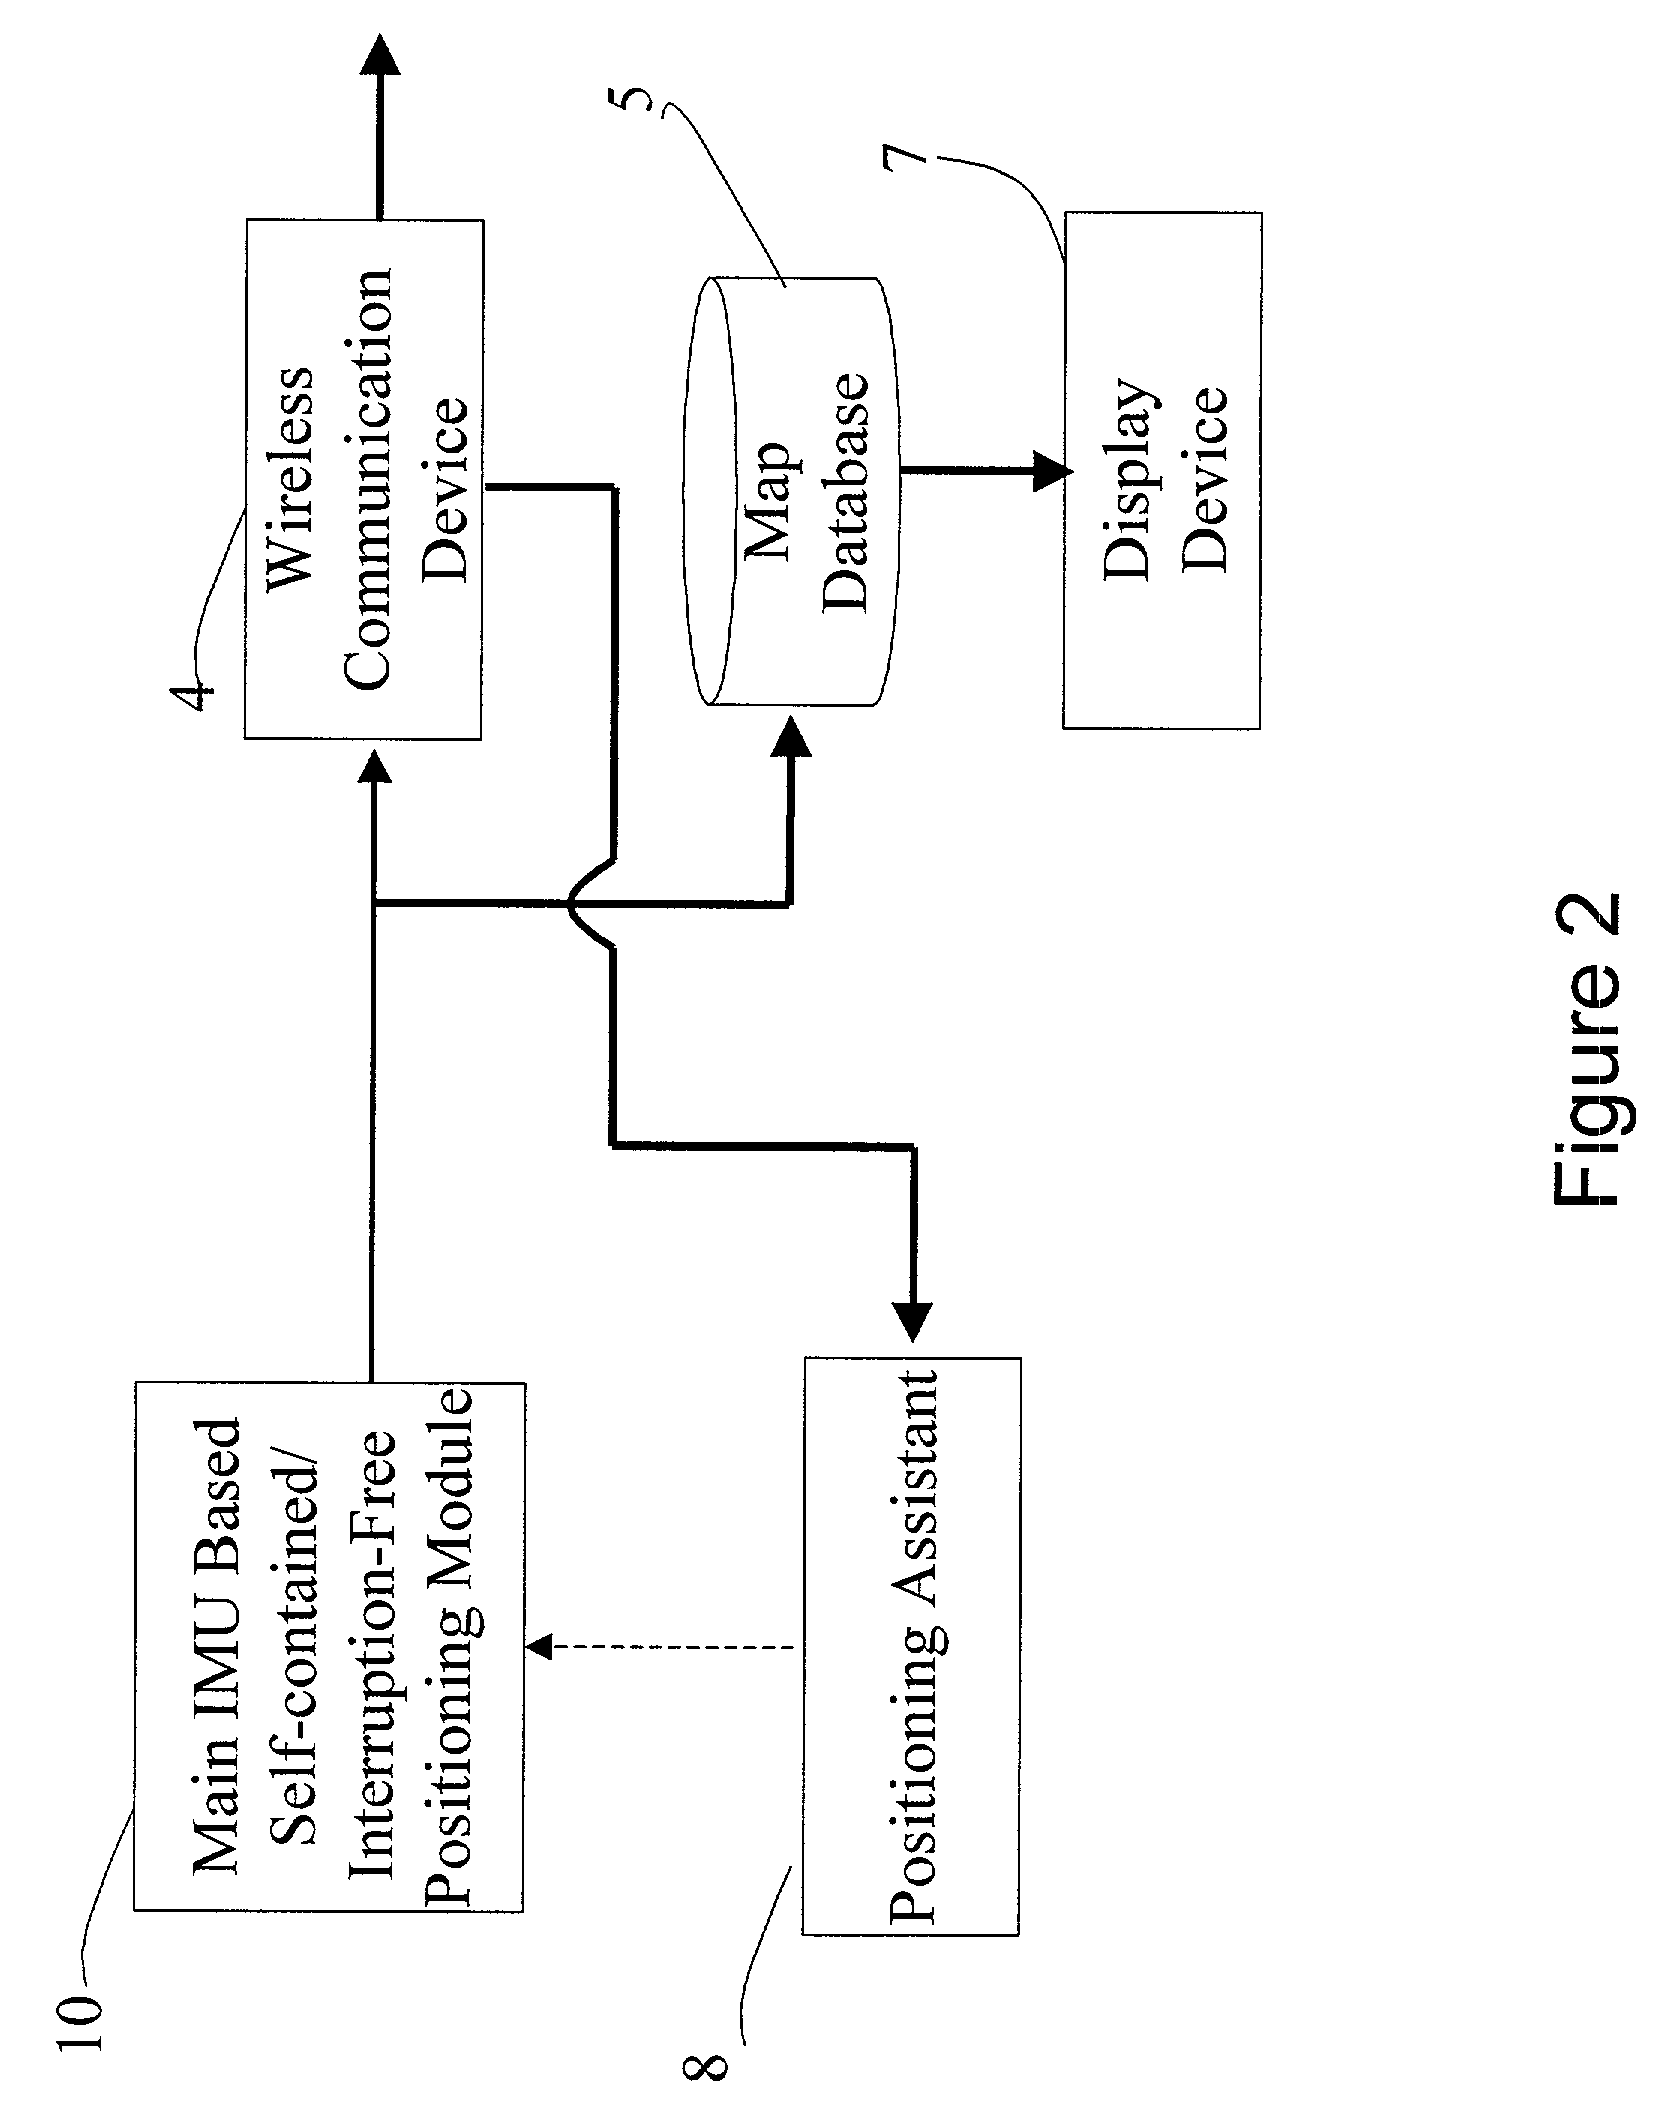 Self-contained/interruption-free positioning method and system thereof